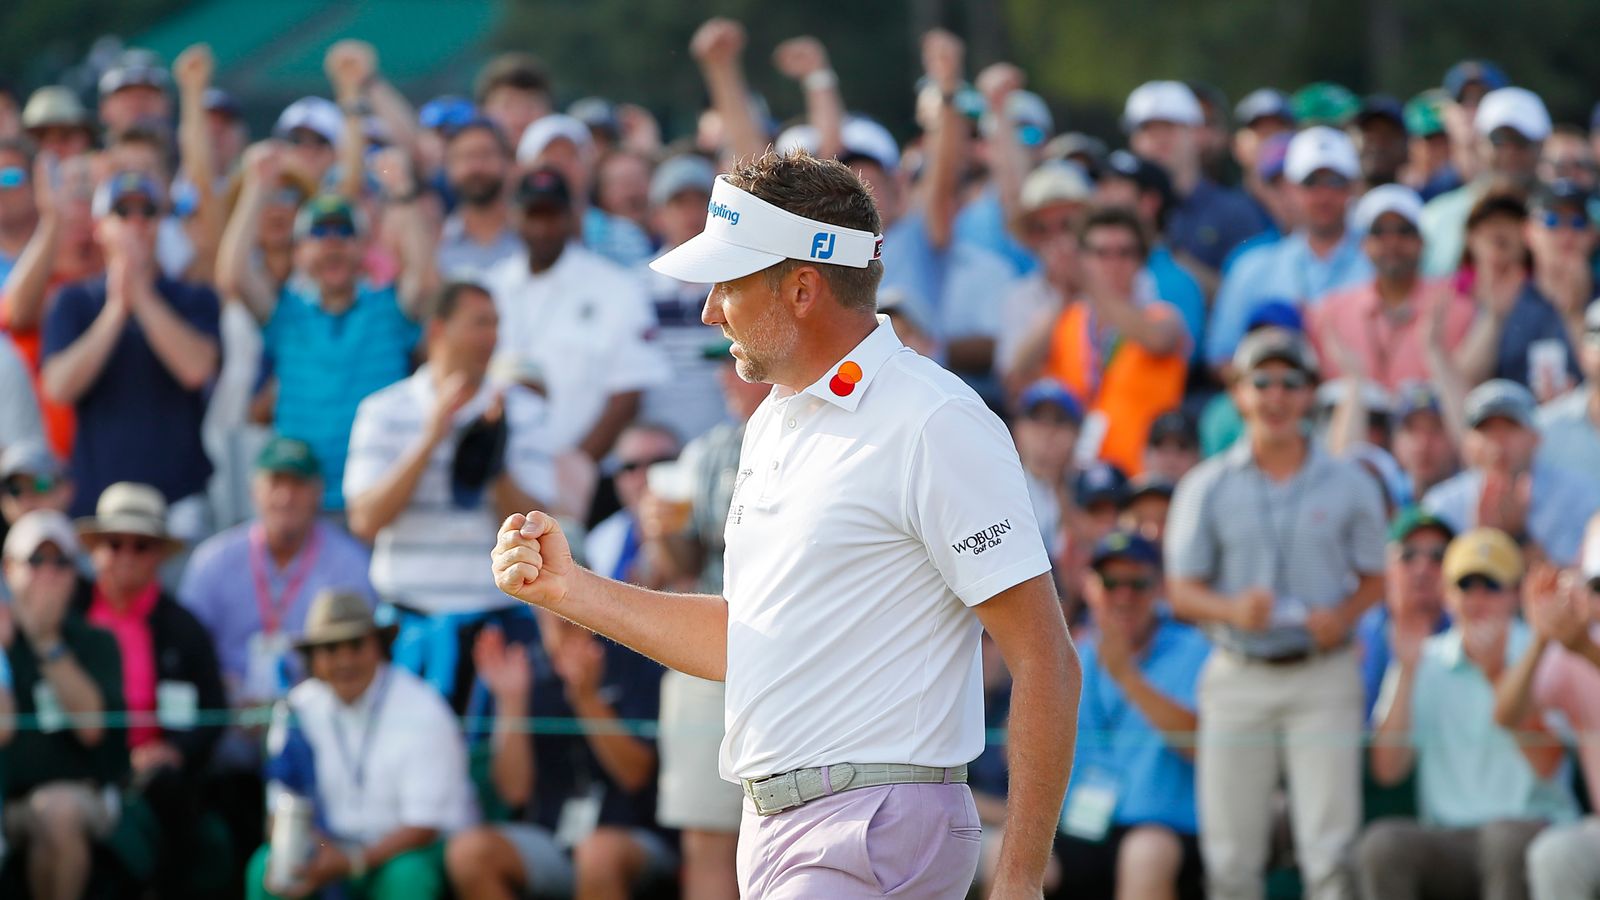 The Masters Ian Poulter aiming to take 'low' road to victory Golf